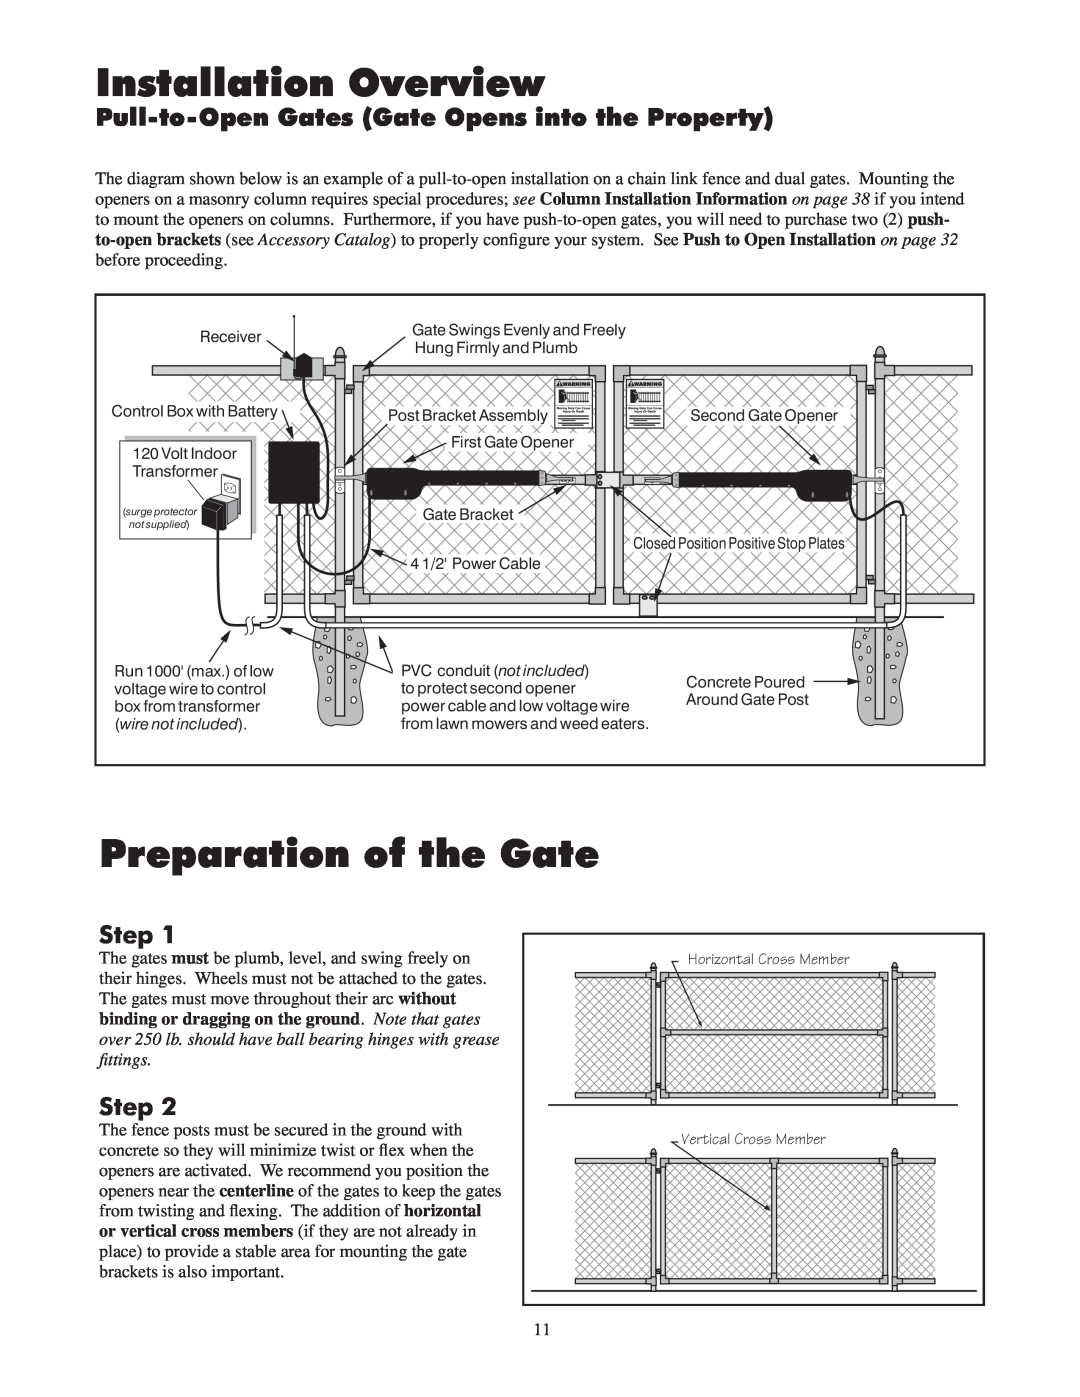 GTO 2502, 2550 Installation Overview, Preparation of the Gate, Pull-to-OpenGates Gate Opens into the Property, Step 